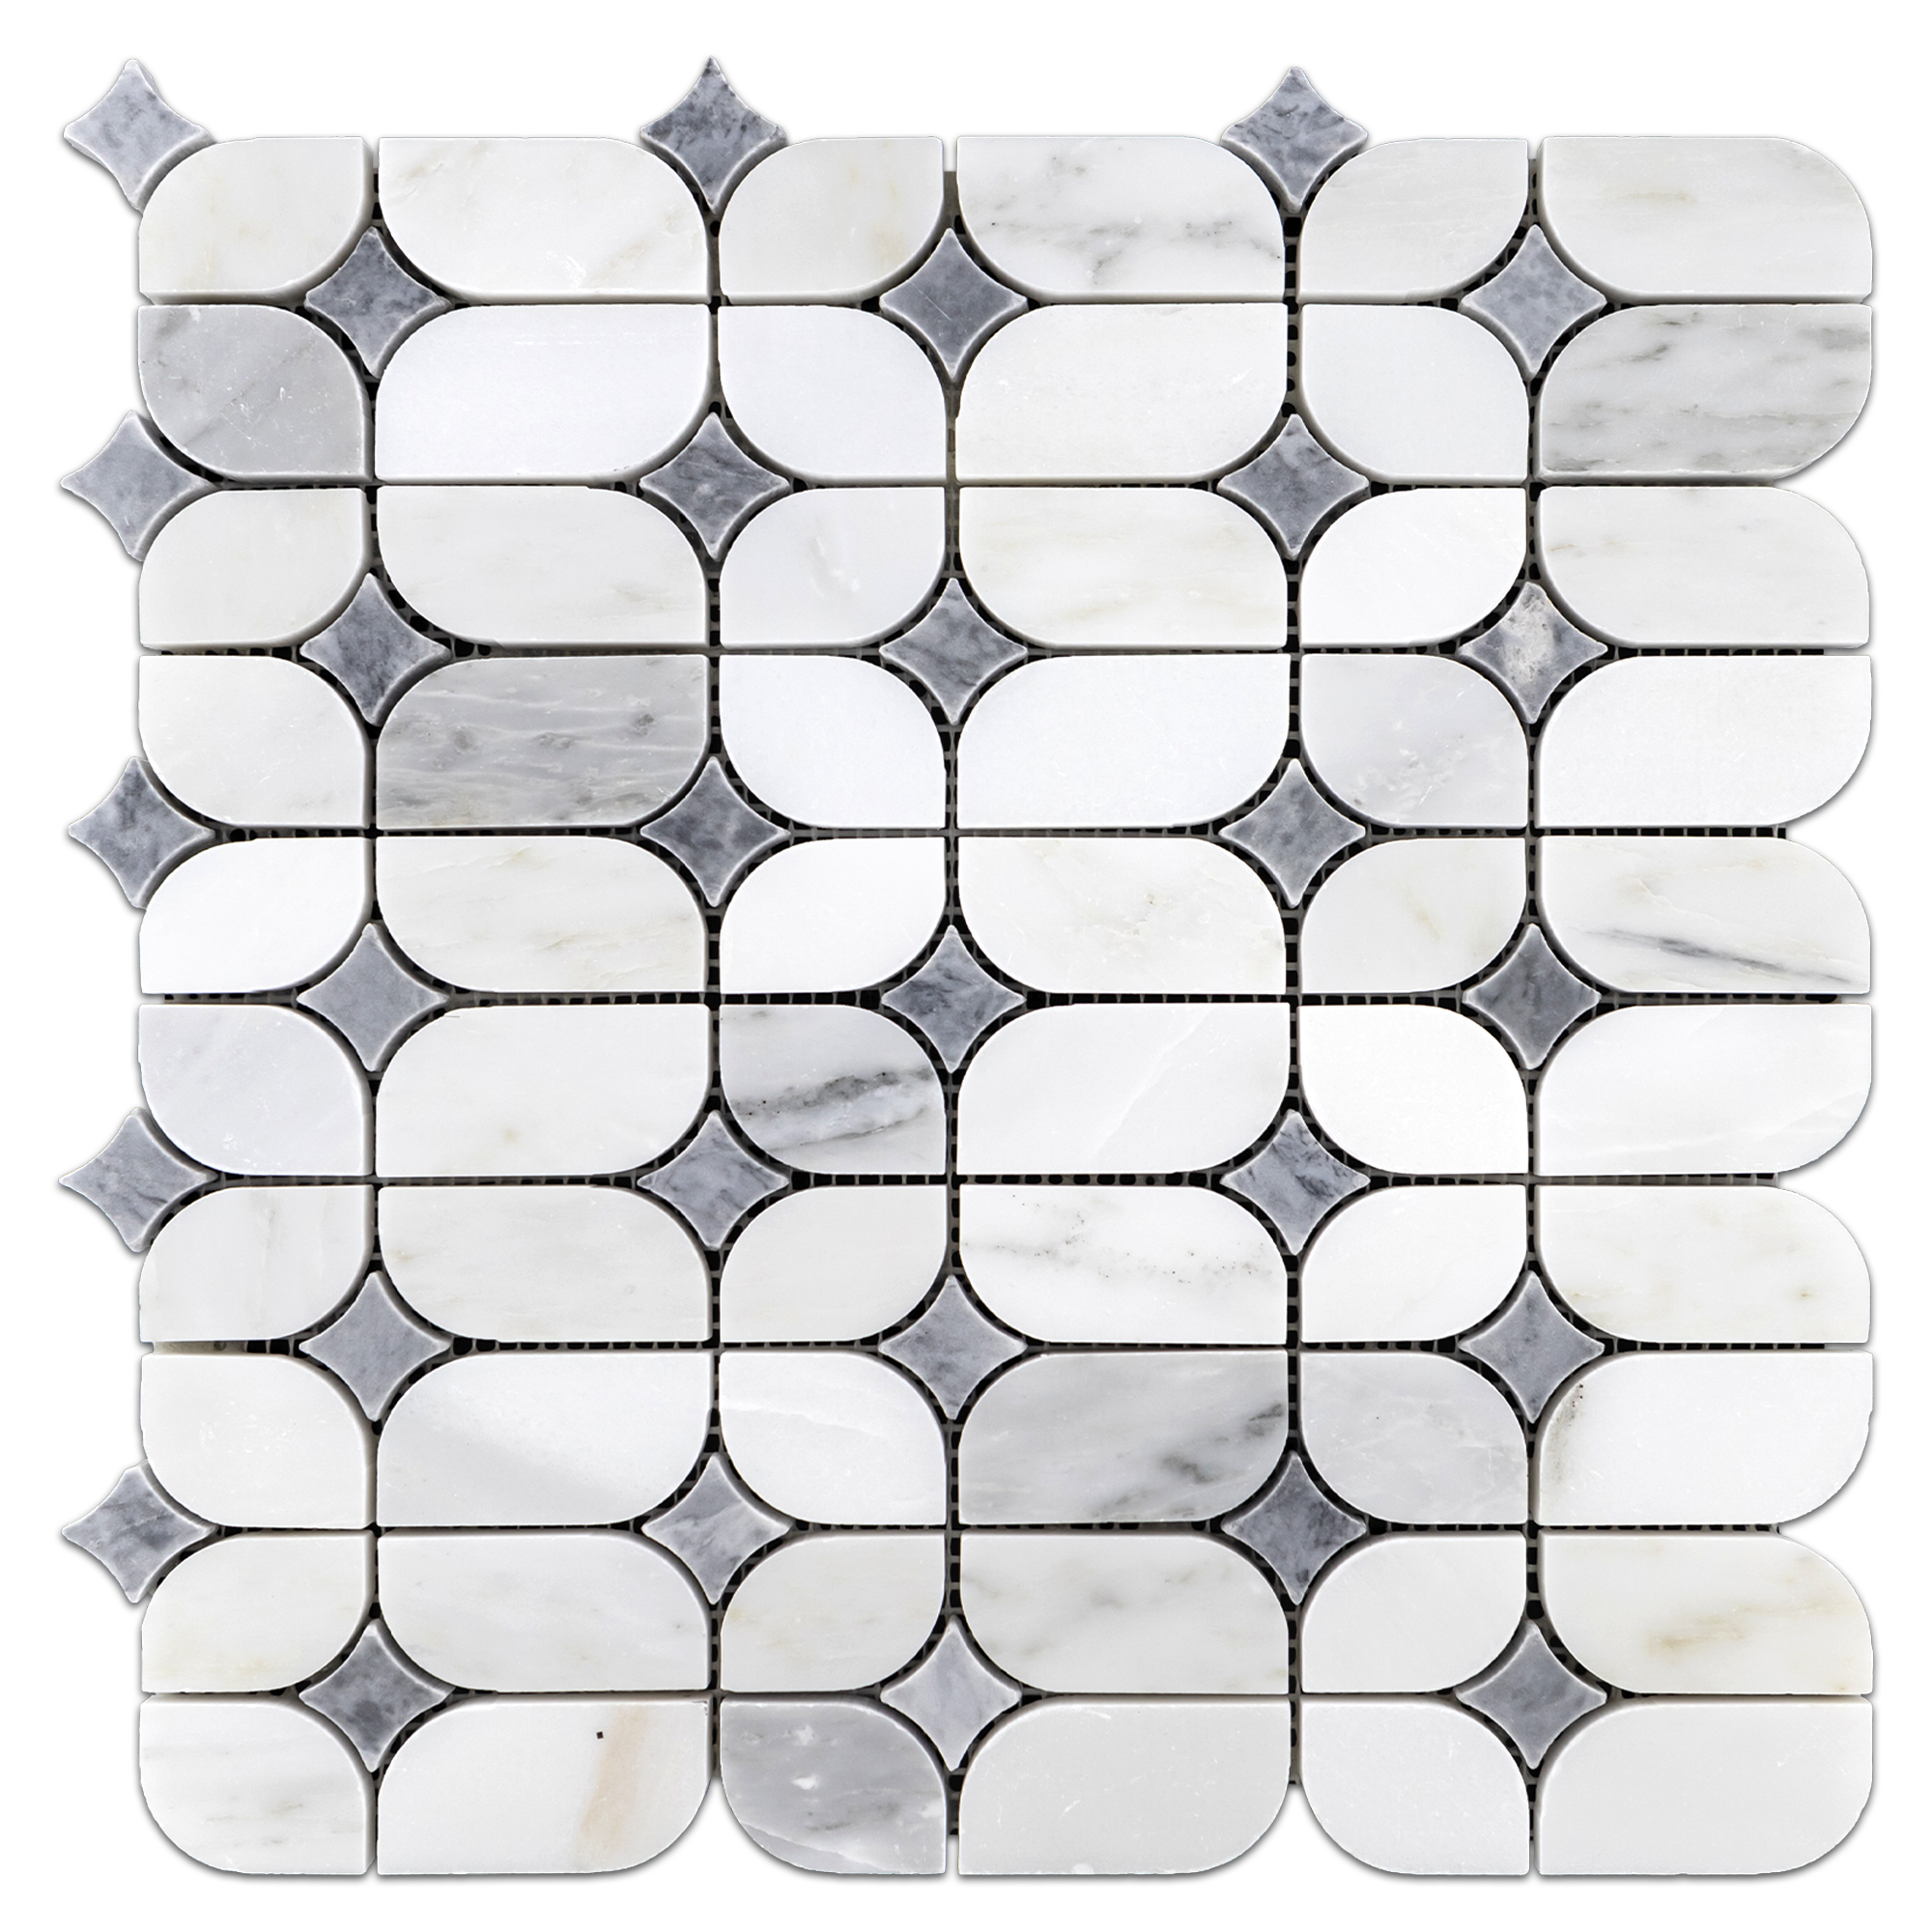 Elon Pearl White Pacific Gray Marble Starlight Field Mosaic 12x12x0.375 Polished Tile AM8639P Surface Group International Product